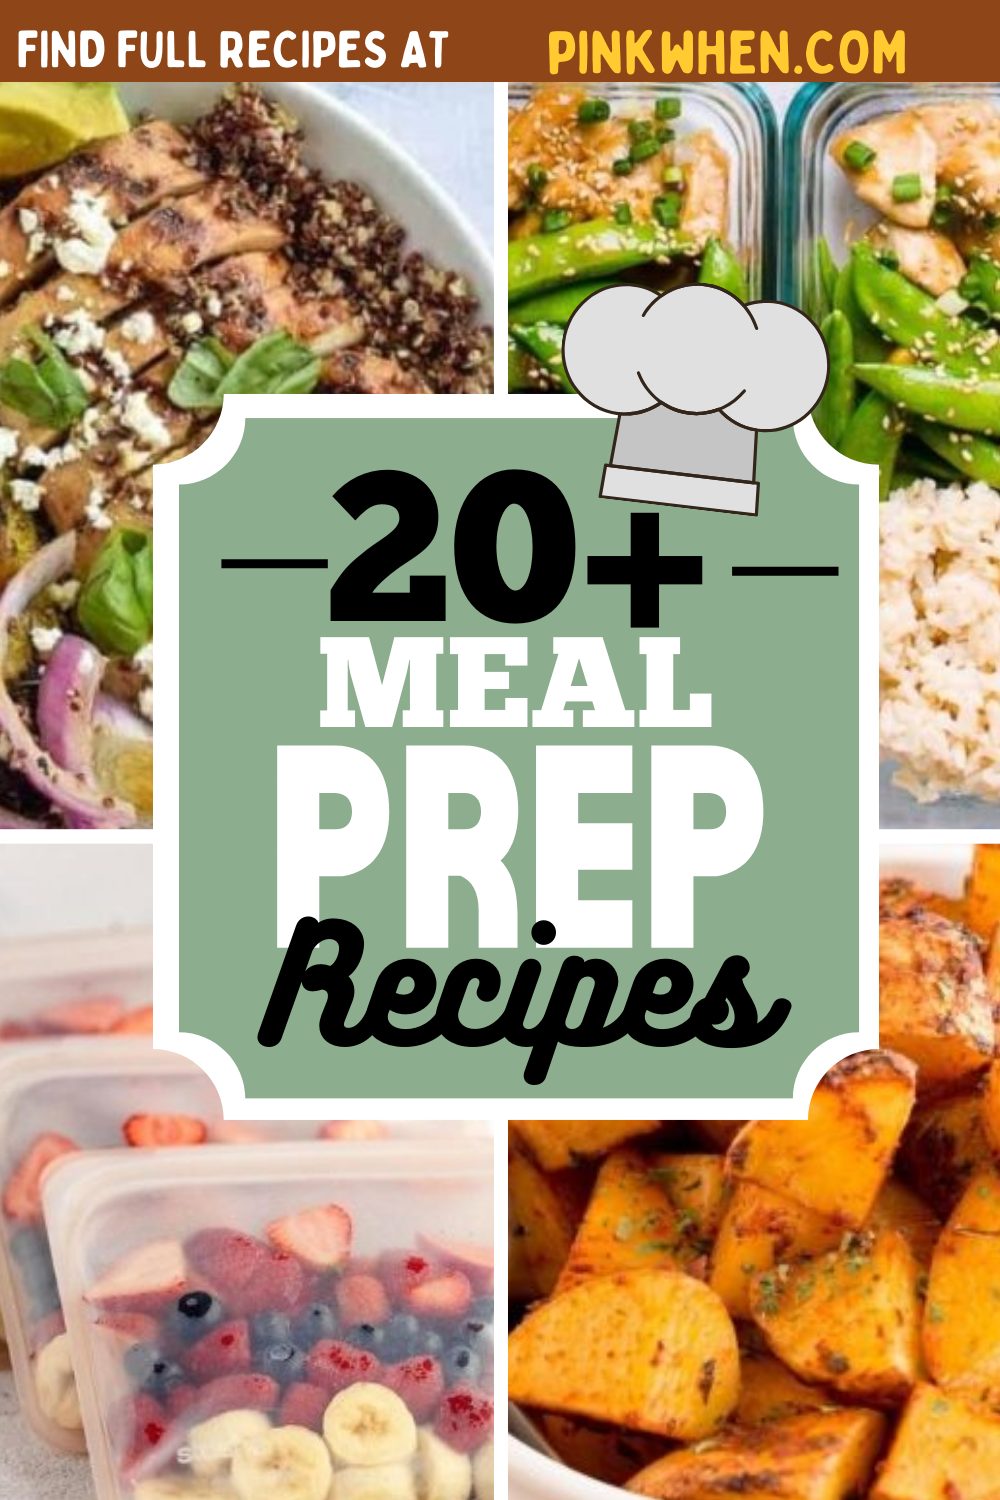 Meal Prep Recipes to Make Your Week Easier